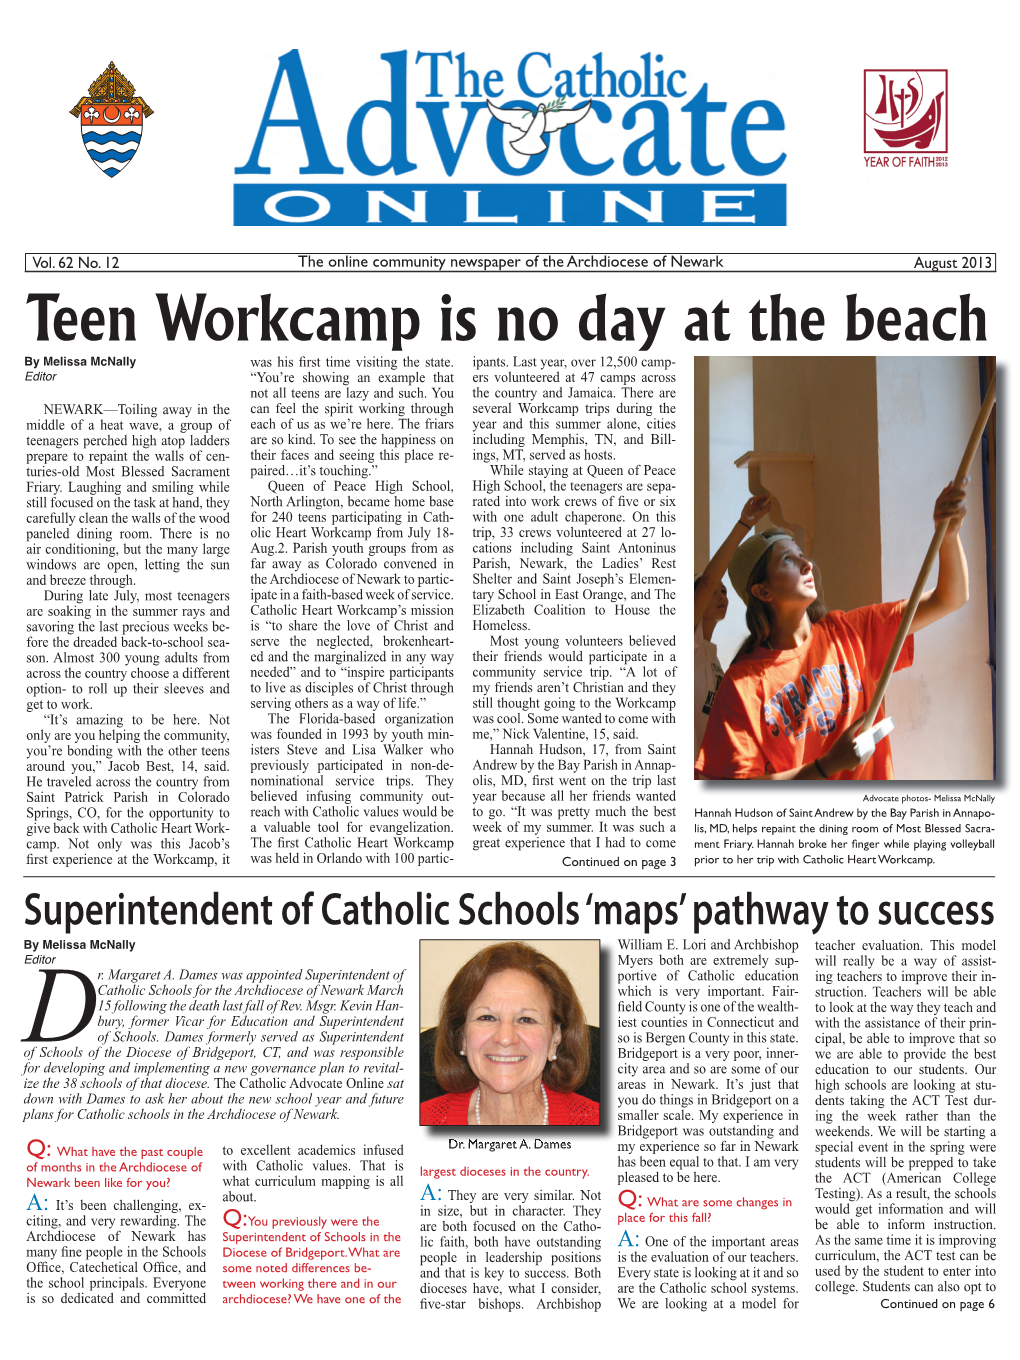 Teen Workcamp Is No Day at the Beach by Melissa Mcnally Was His Fi Rst Time Visiting the State